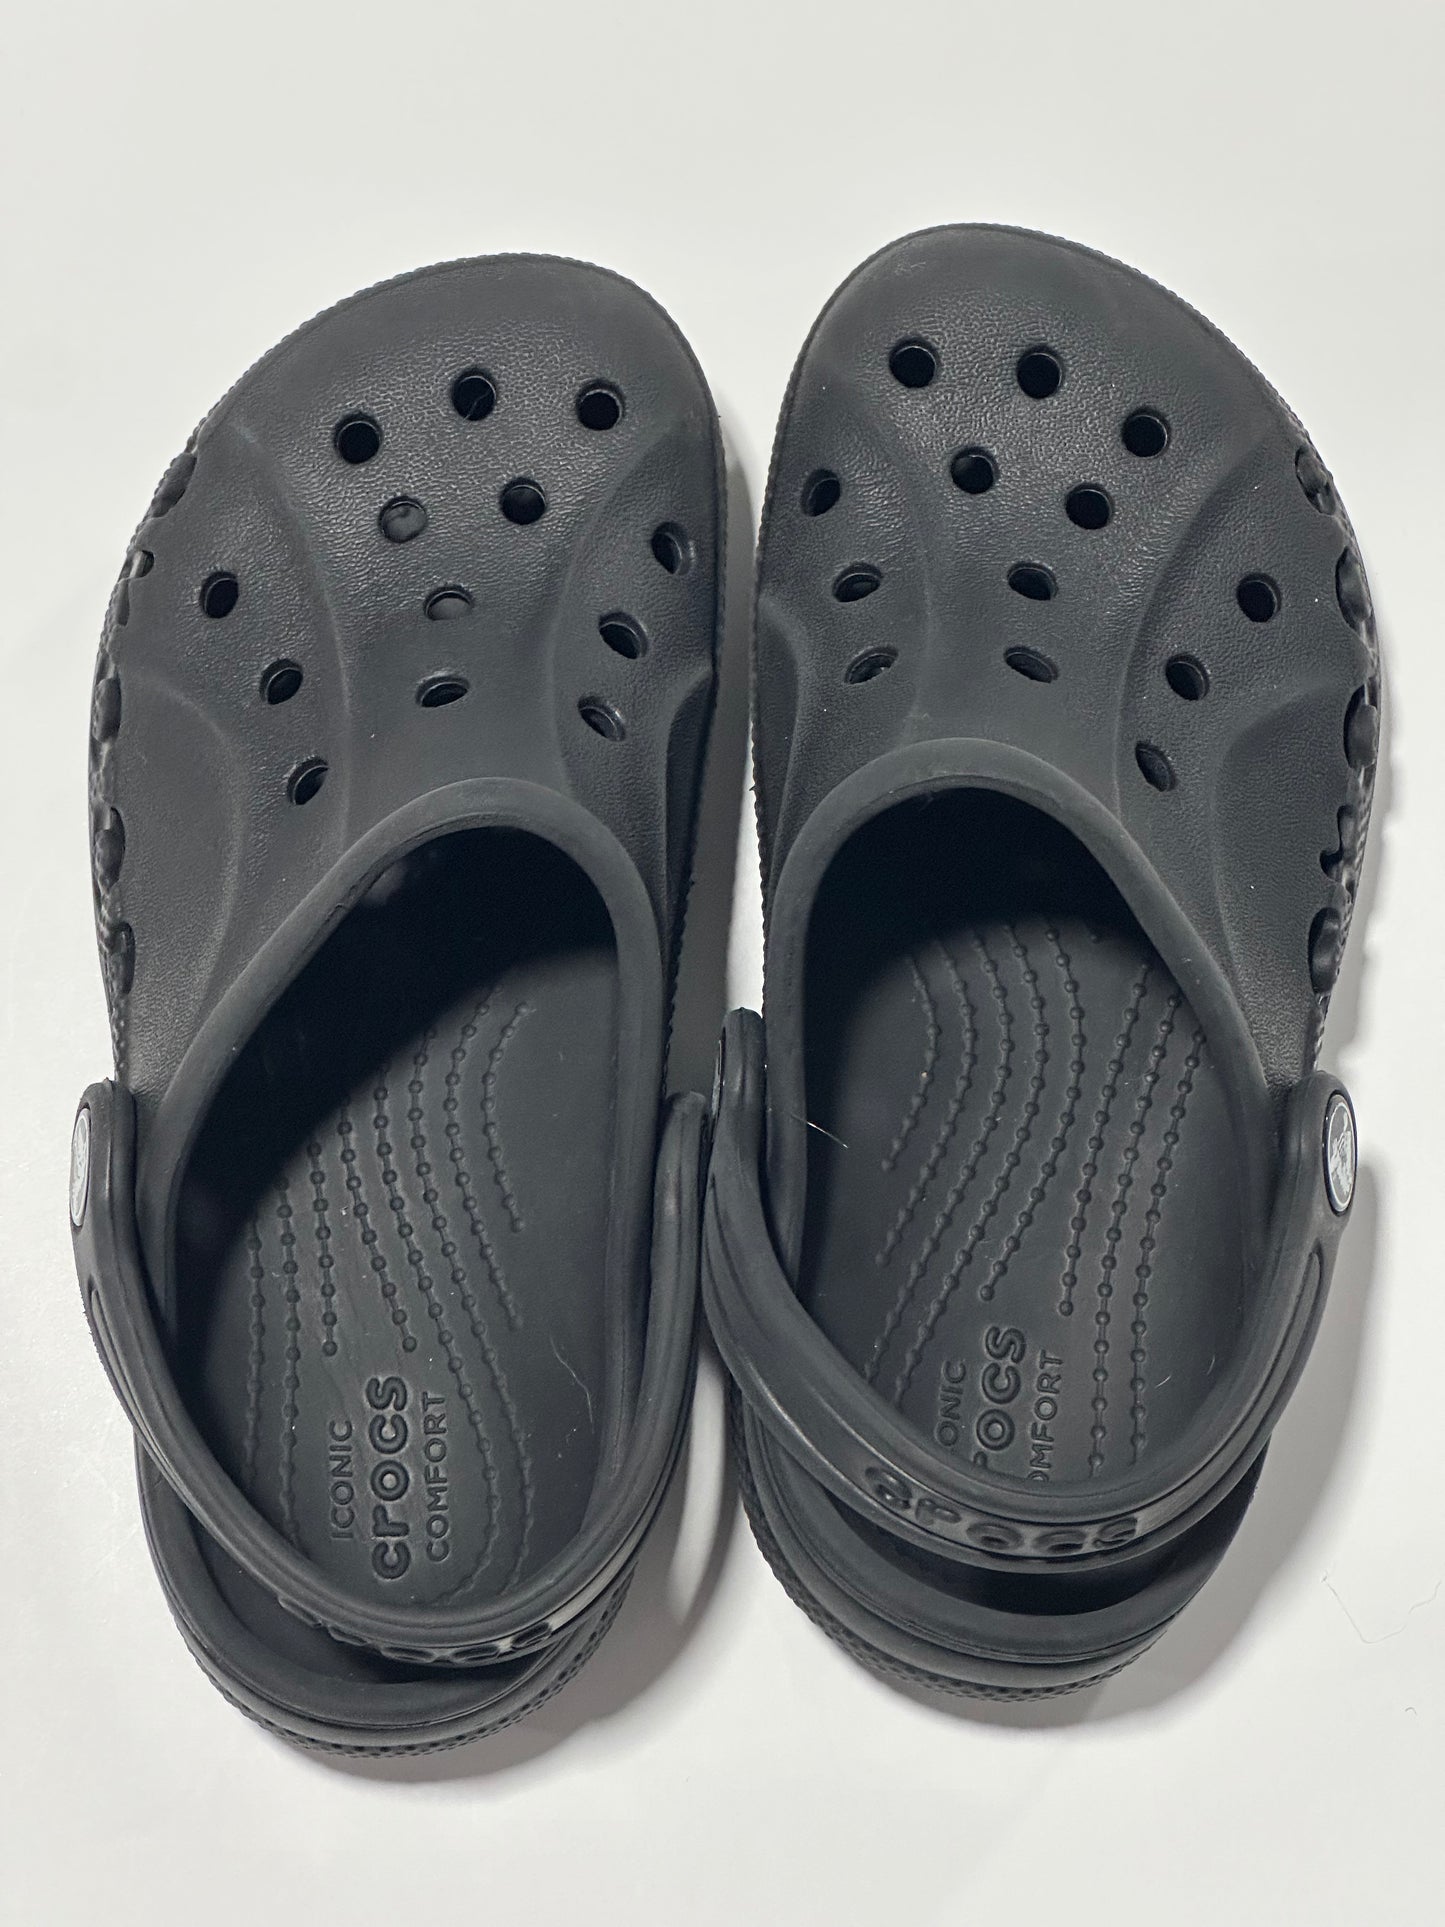 Black Crocs - VGUC - size C12 - great for boys or girls